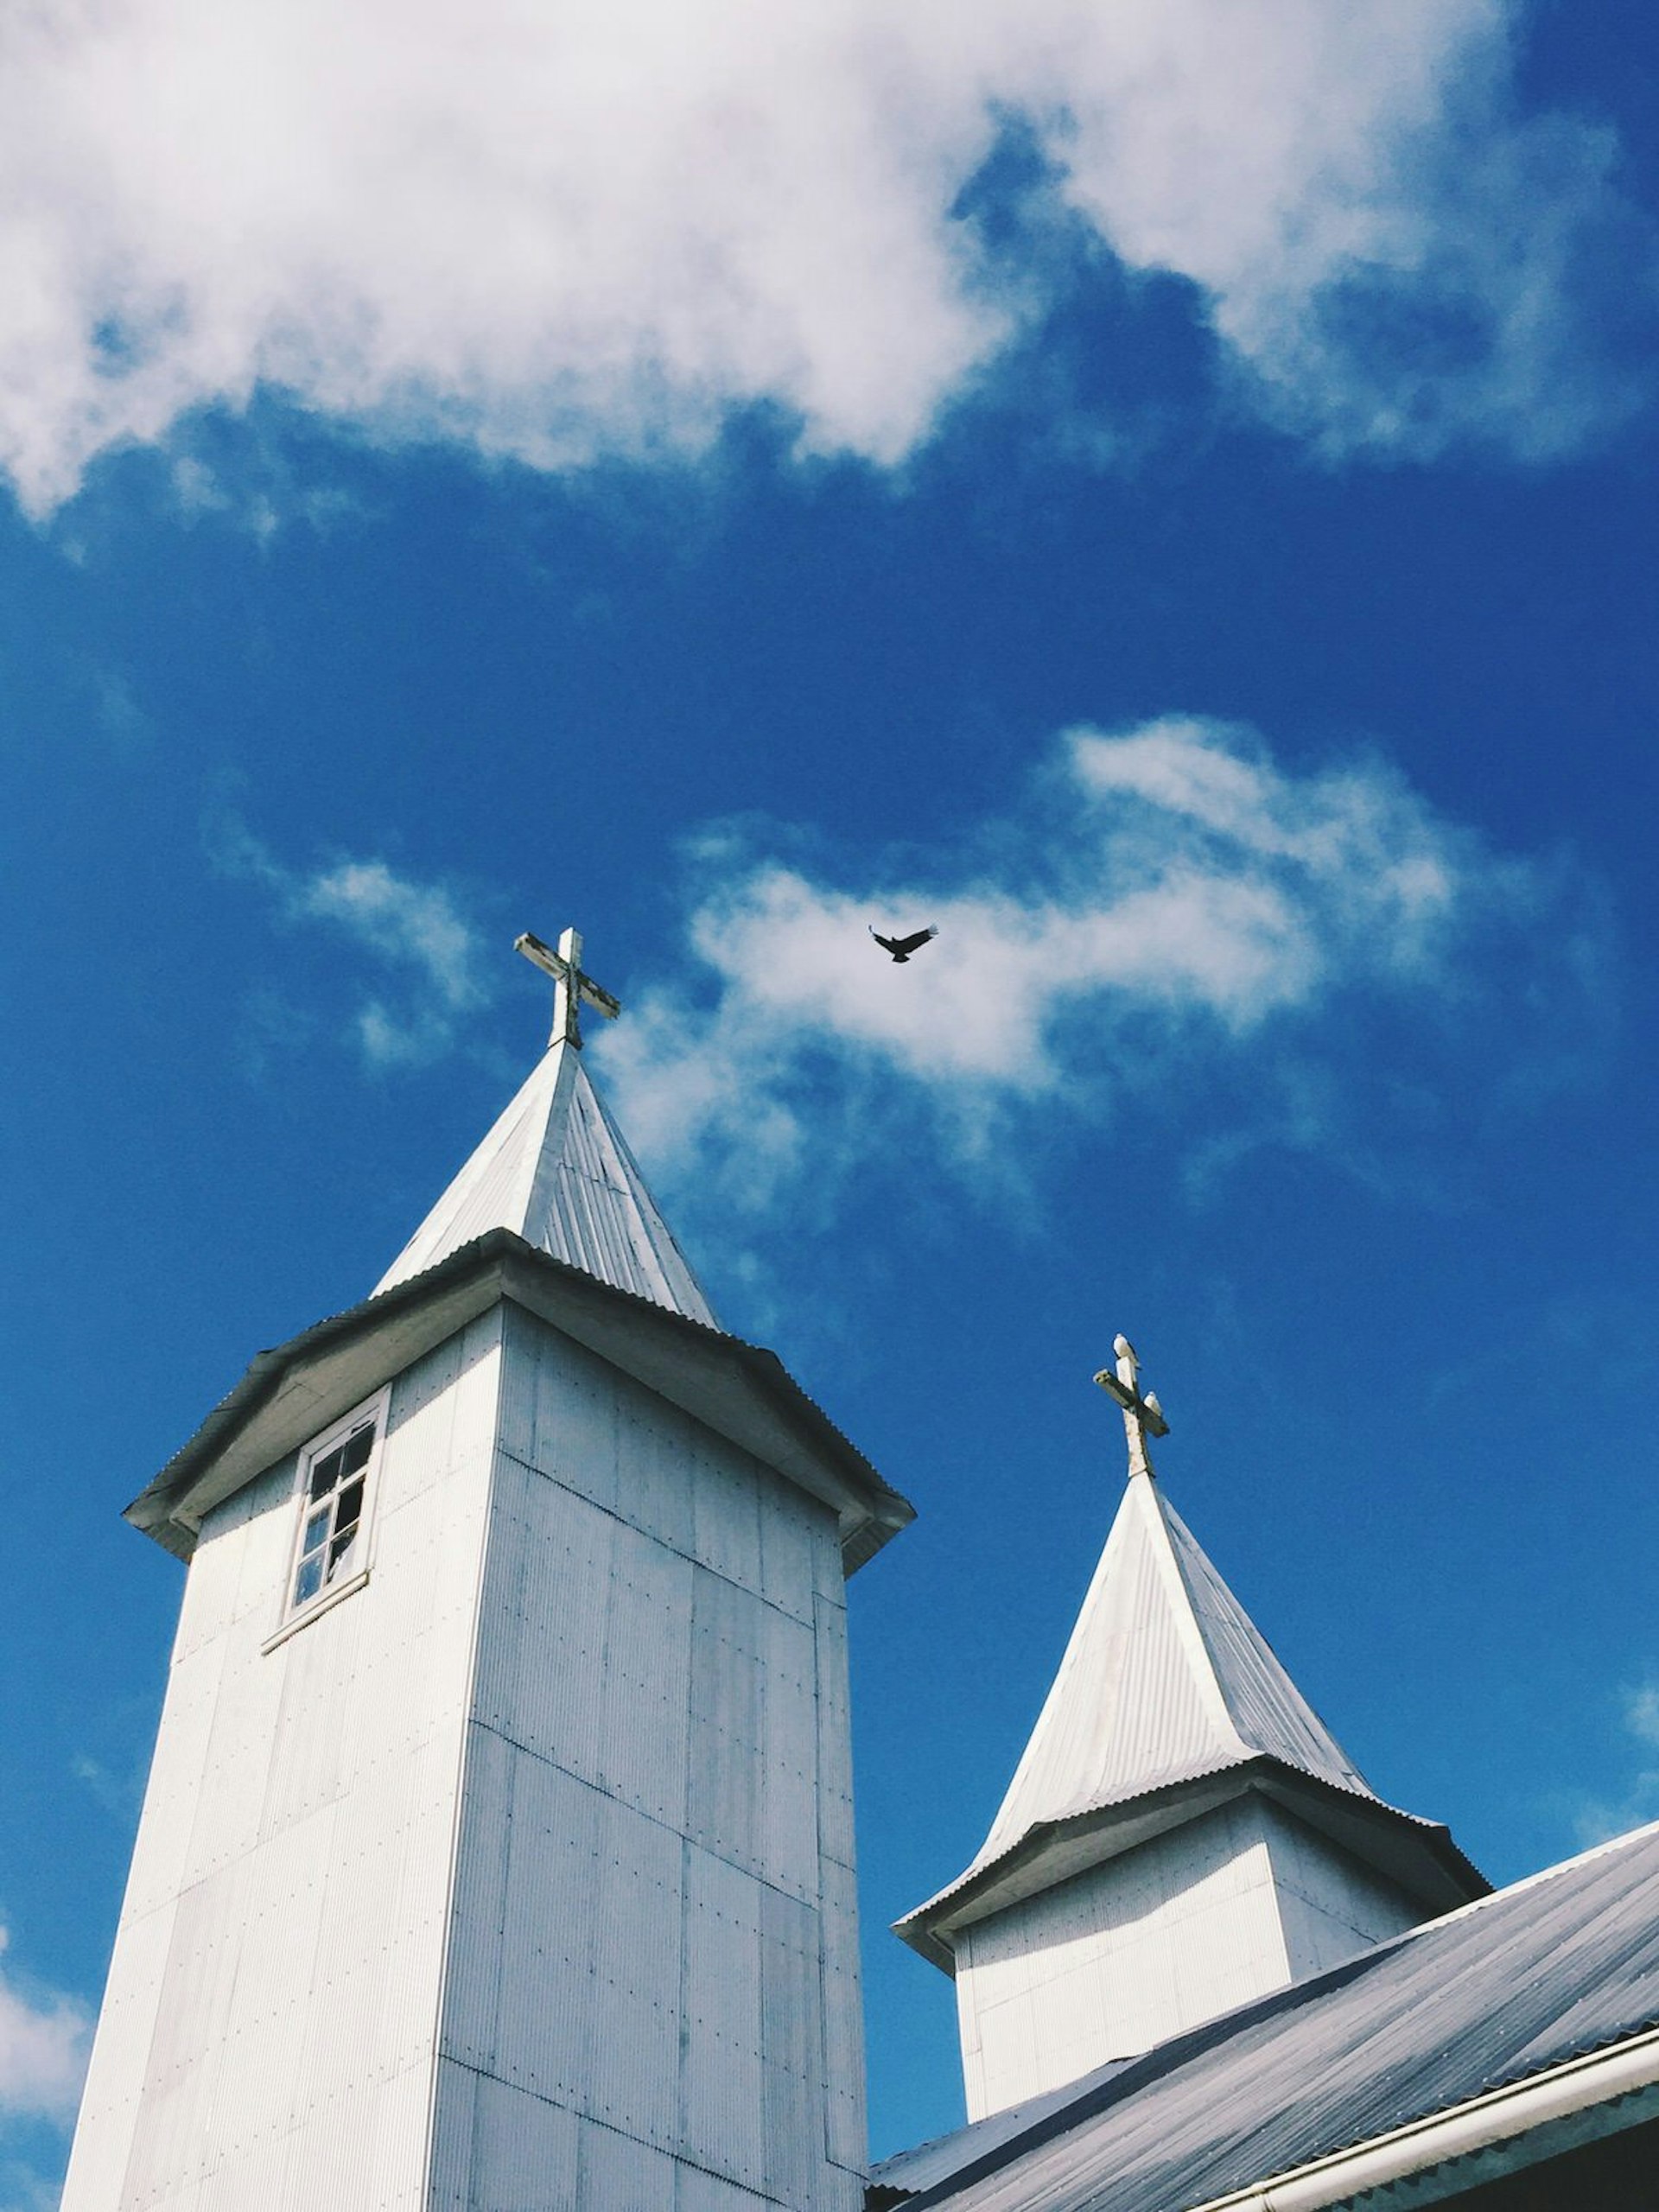 The architecture of Jesuit missionary-built churches on Chile's quiet Chiloé Island is striking in its own right, but something as simple as a bird flying into the frame adds movement to an otherwise static scene and helps establish a sense of place © MaSovaida Morgan / Lonely Planet